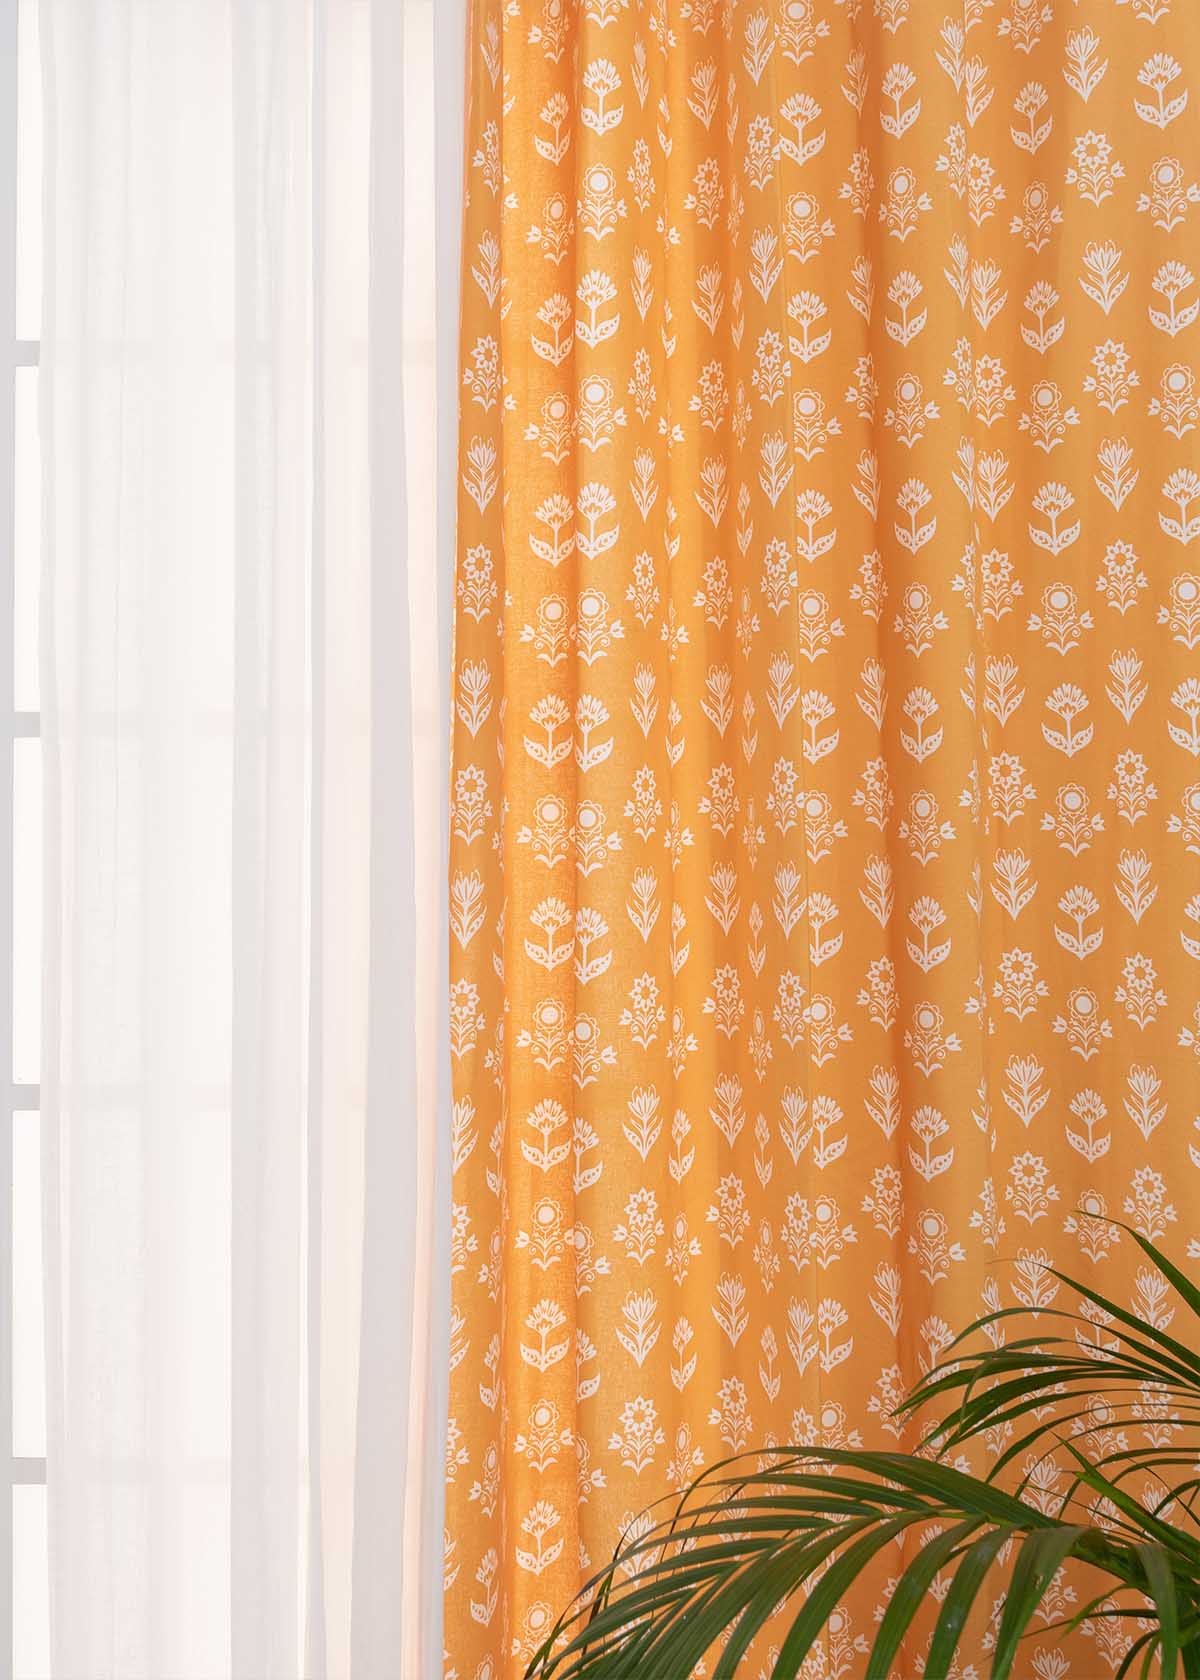 Dahlia Mustard, Solid Warm White Solid Sheer Set of 4 Combo Cotton Curtain - Mustard, White